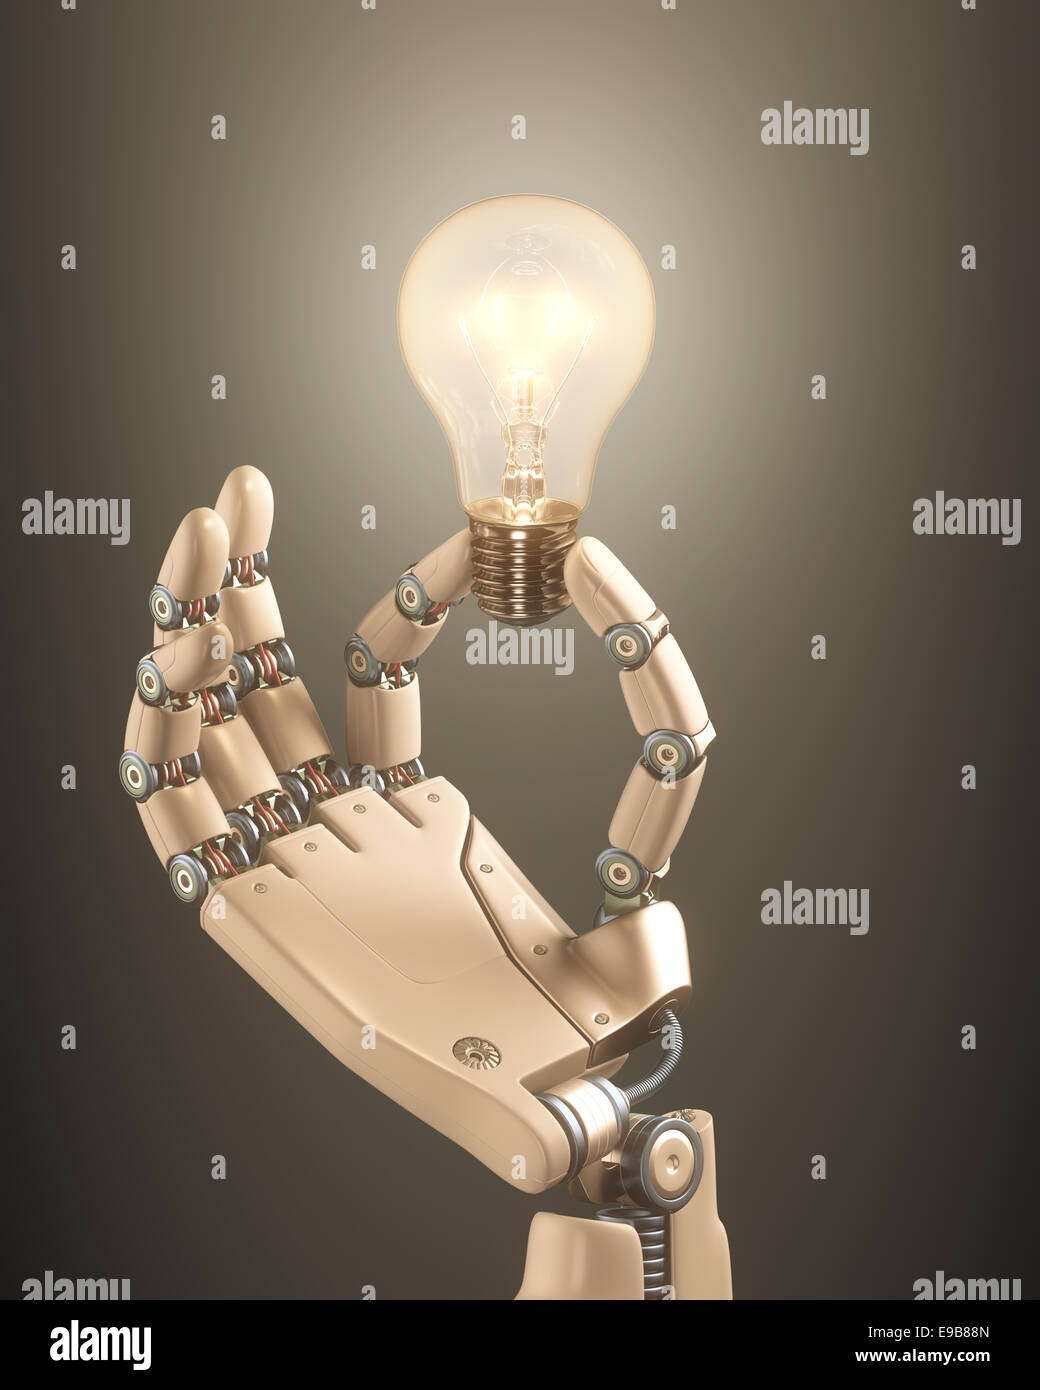 Robot hand holding a bulb on a conceptual idea technology. Clipping path included. Stock Photo